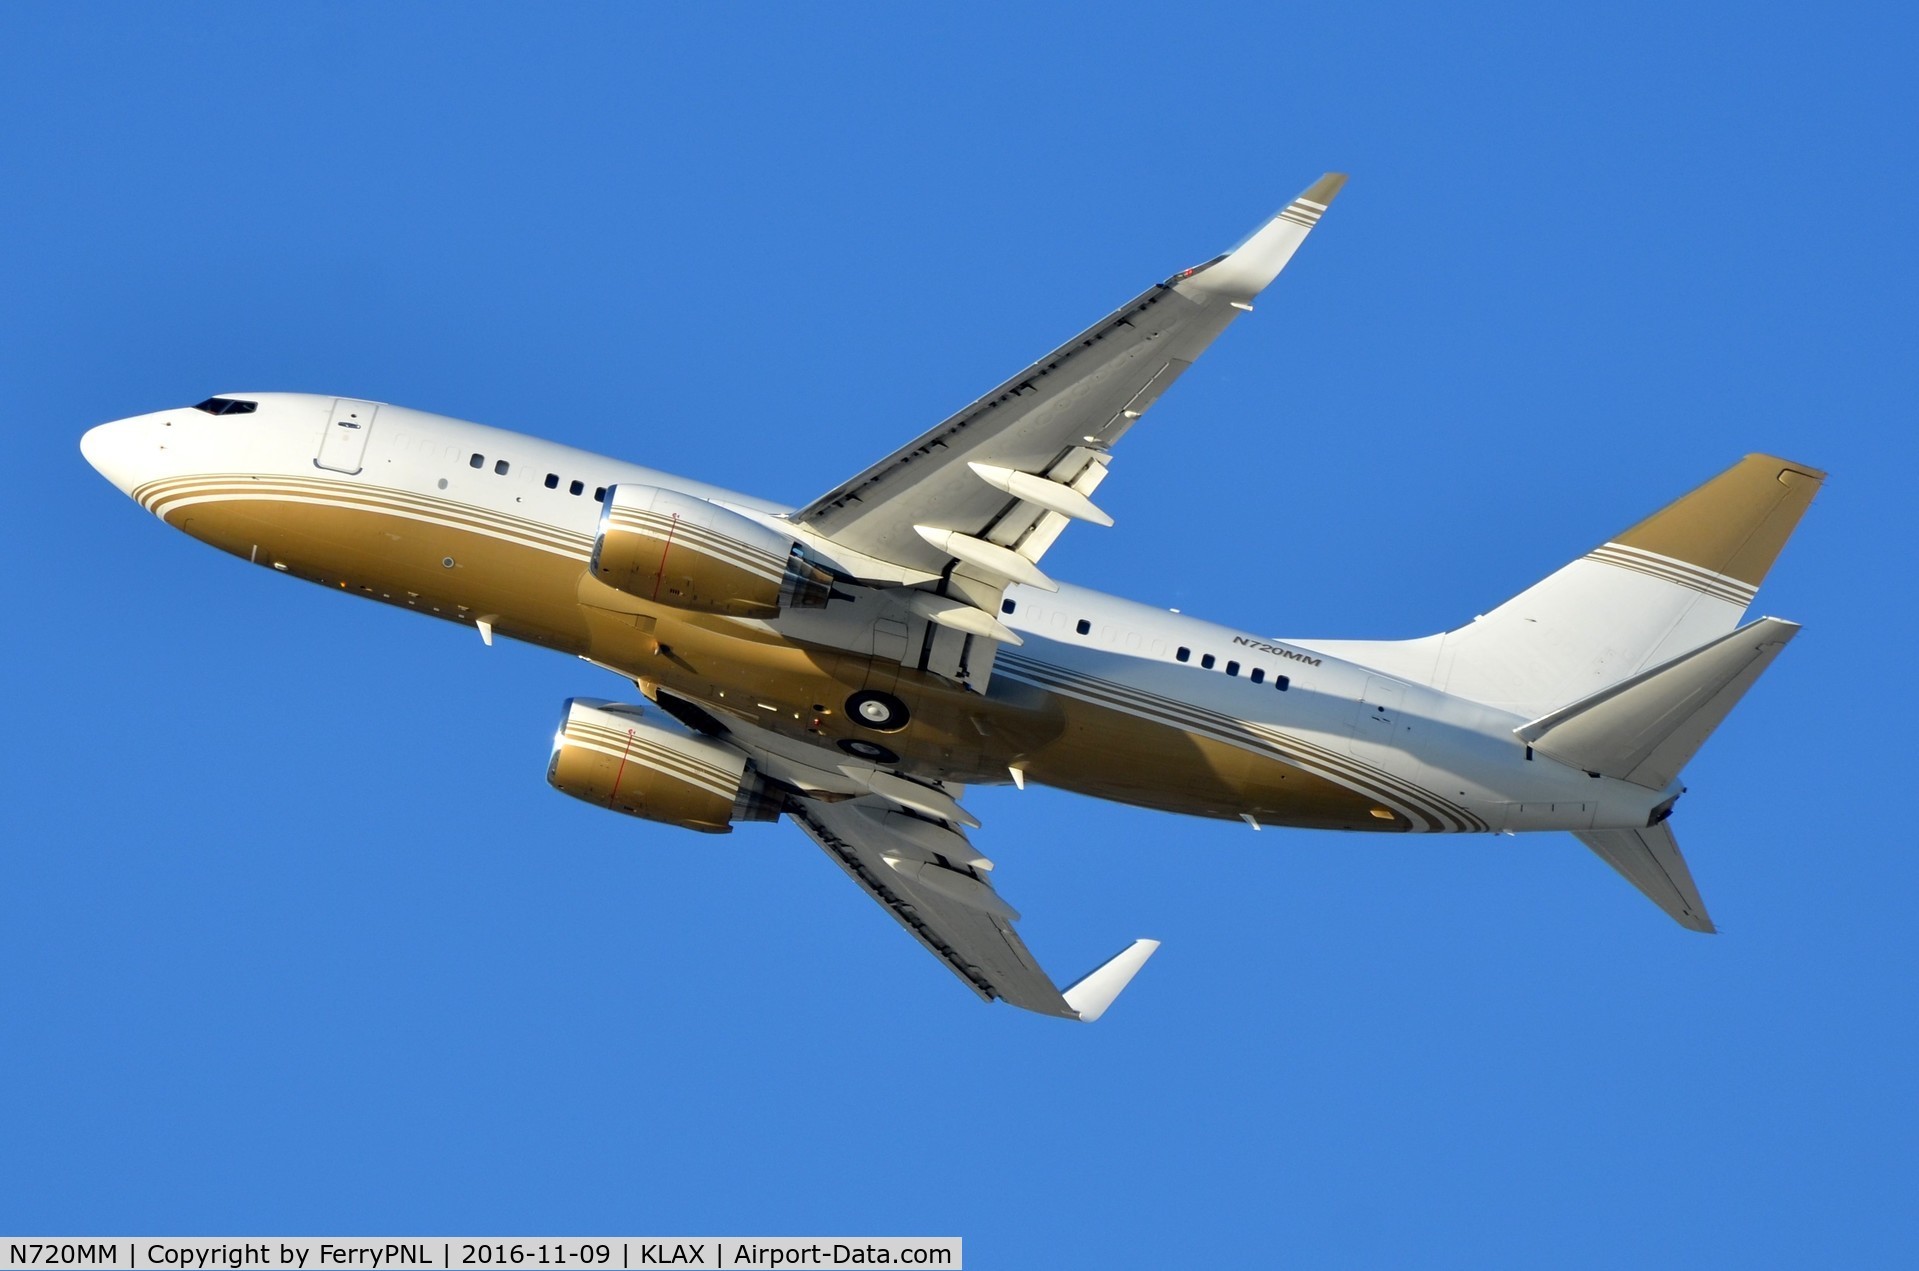 N720MM, 2001 Boeing 737-7ET C/N 33010, MGM's BBJ taking-off from LAX